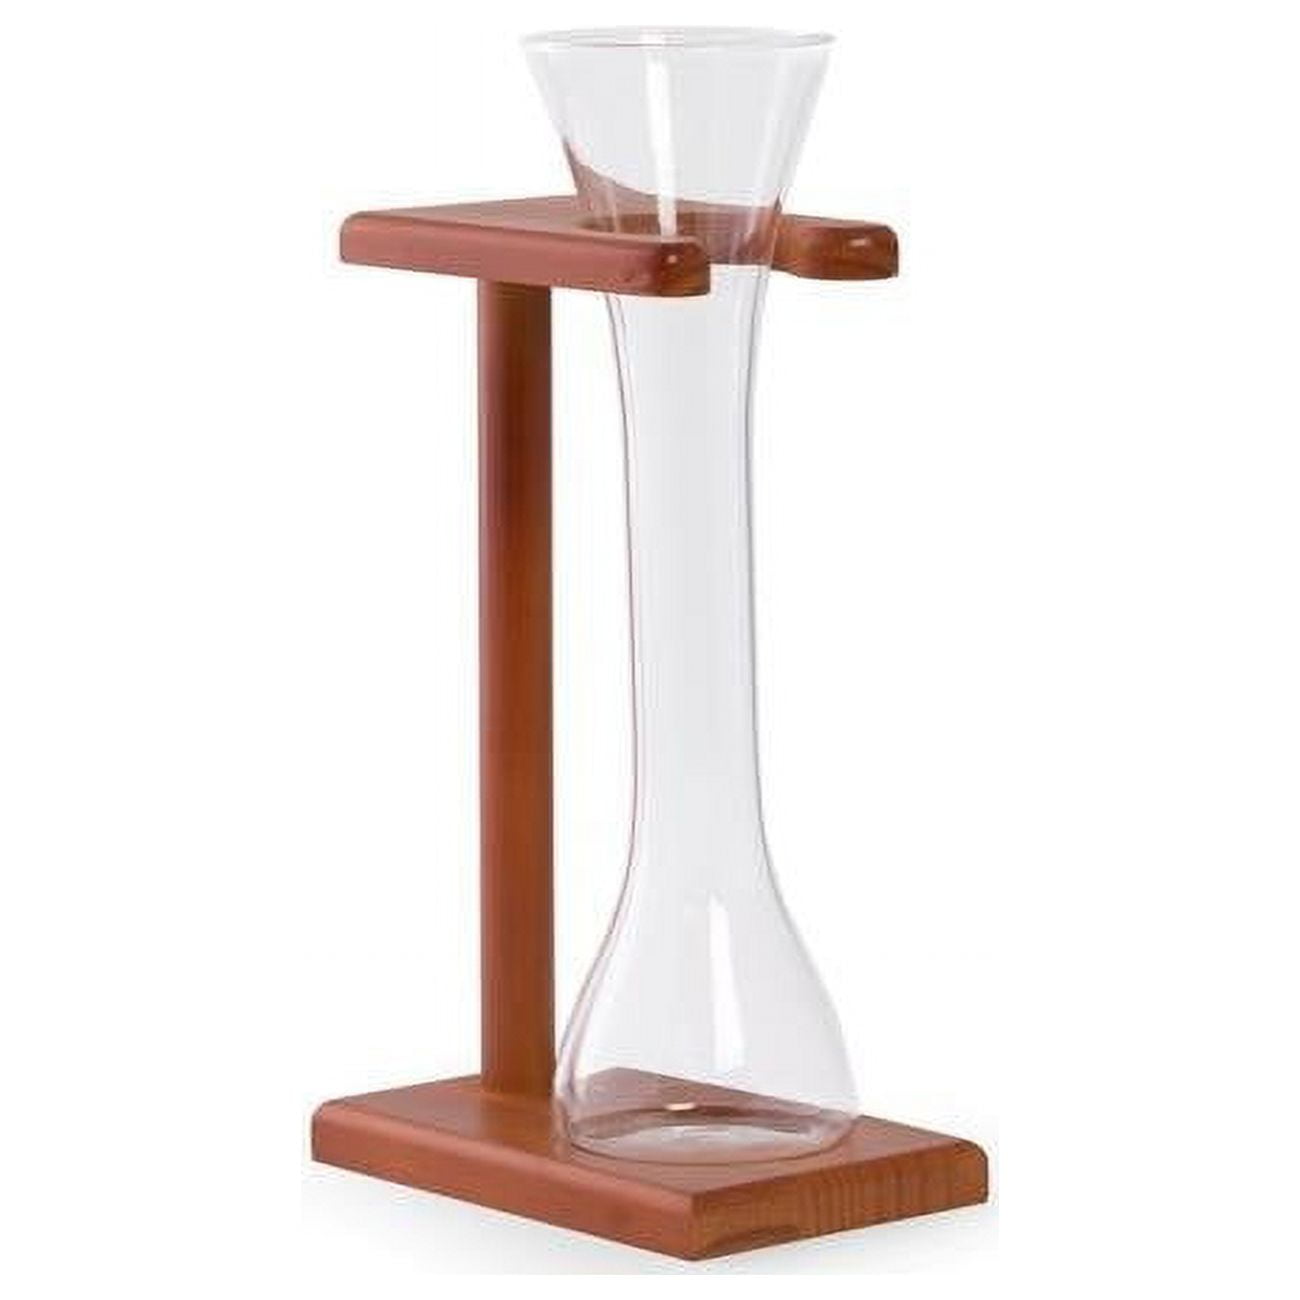 Bey-berk International Bs111s 12 Oz Quarter Yard Of Ale Glass With Wooden Stand